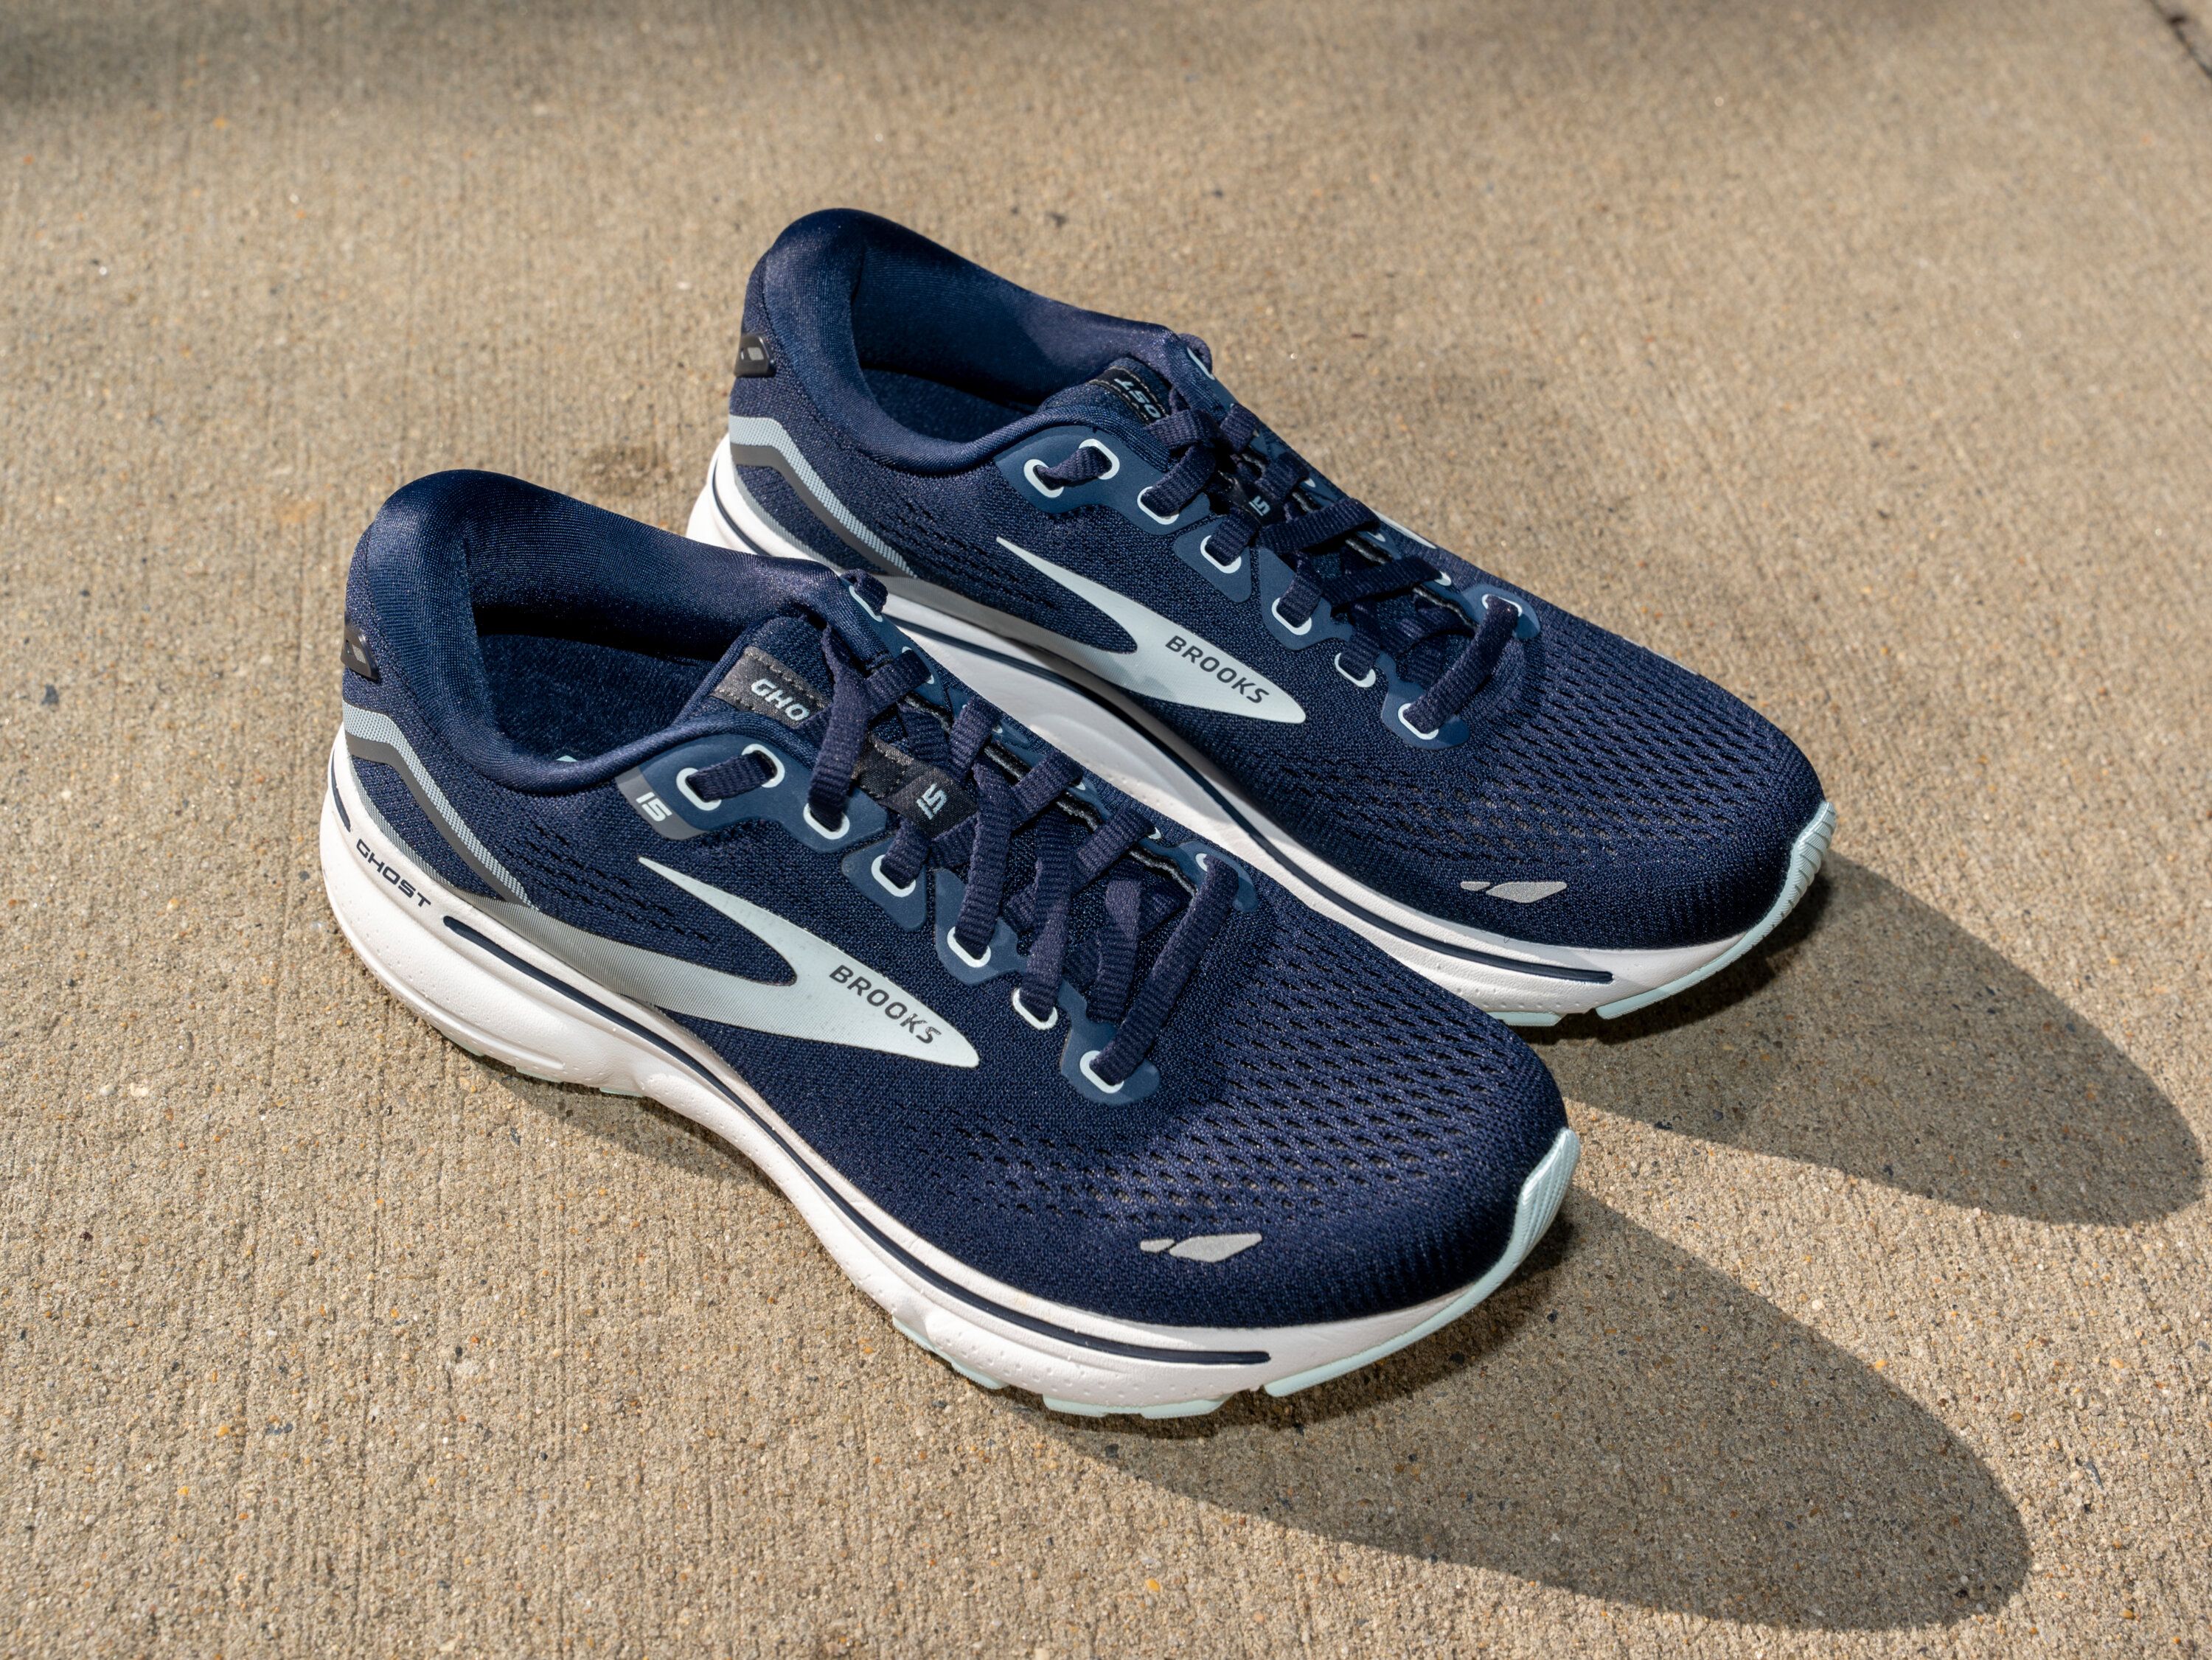 SPECIAL EDITION: BROOKS GHOST 14 WOMEN (Run Visible Collection)